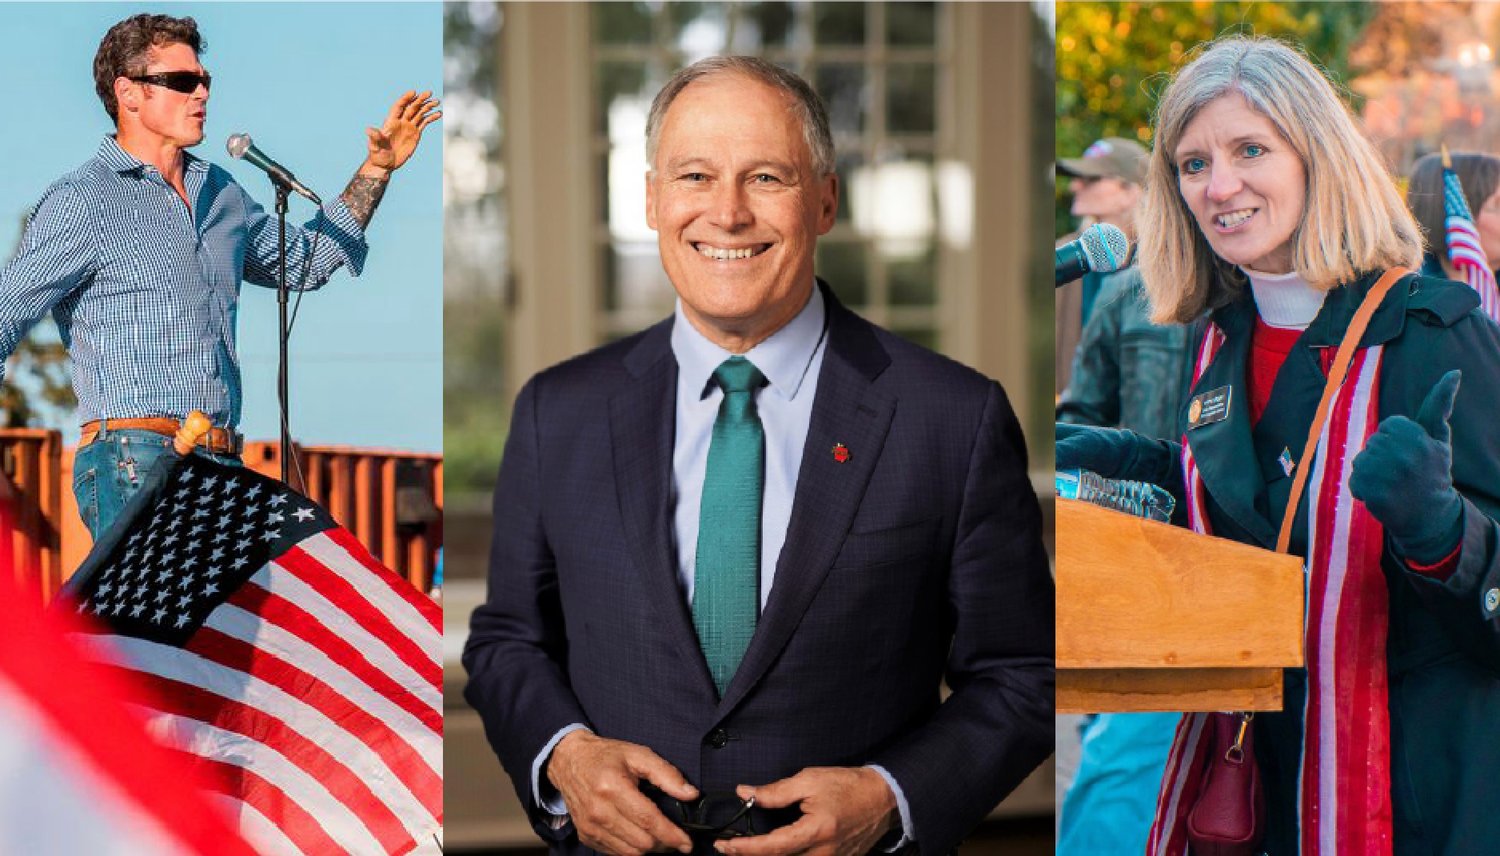 From left, congressional candidate Joe Kent, R-Yacolt; Gov. Jay Inslee and congressional candidate and state representative Vicki Kraft, R-Vancouver.